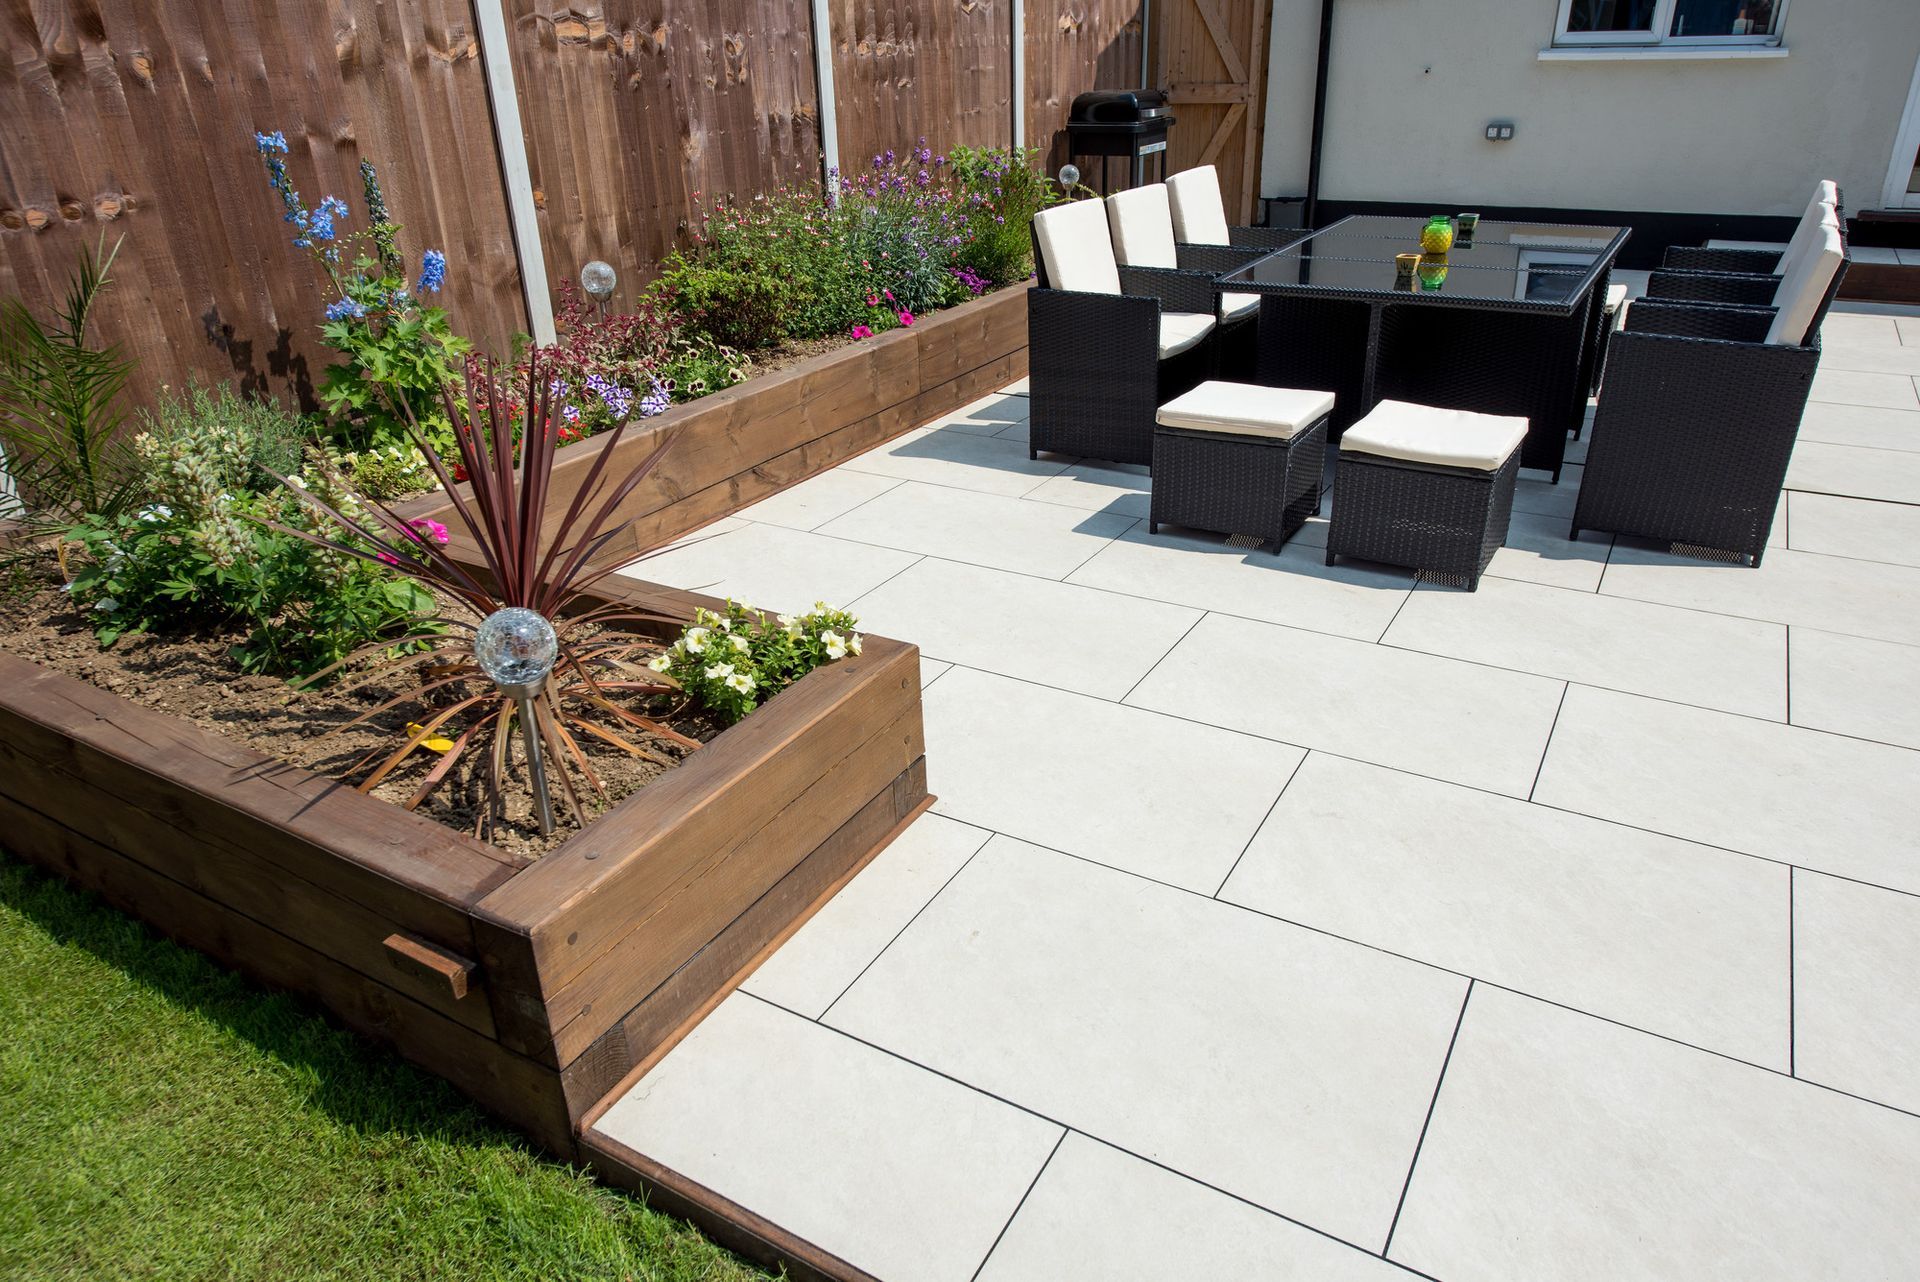 A general view of a back garden patio with white porcelain slabs, tiles, paving and wooden railway sleeper flowers beds, black rattan table and chairs with cream cushions on a bright sunny day in summer